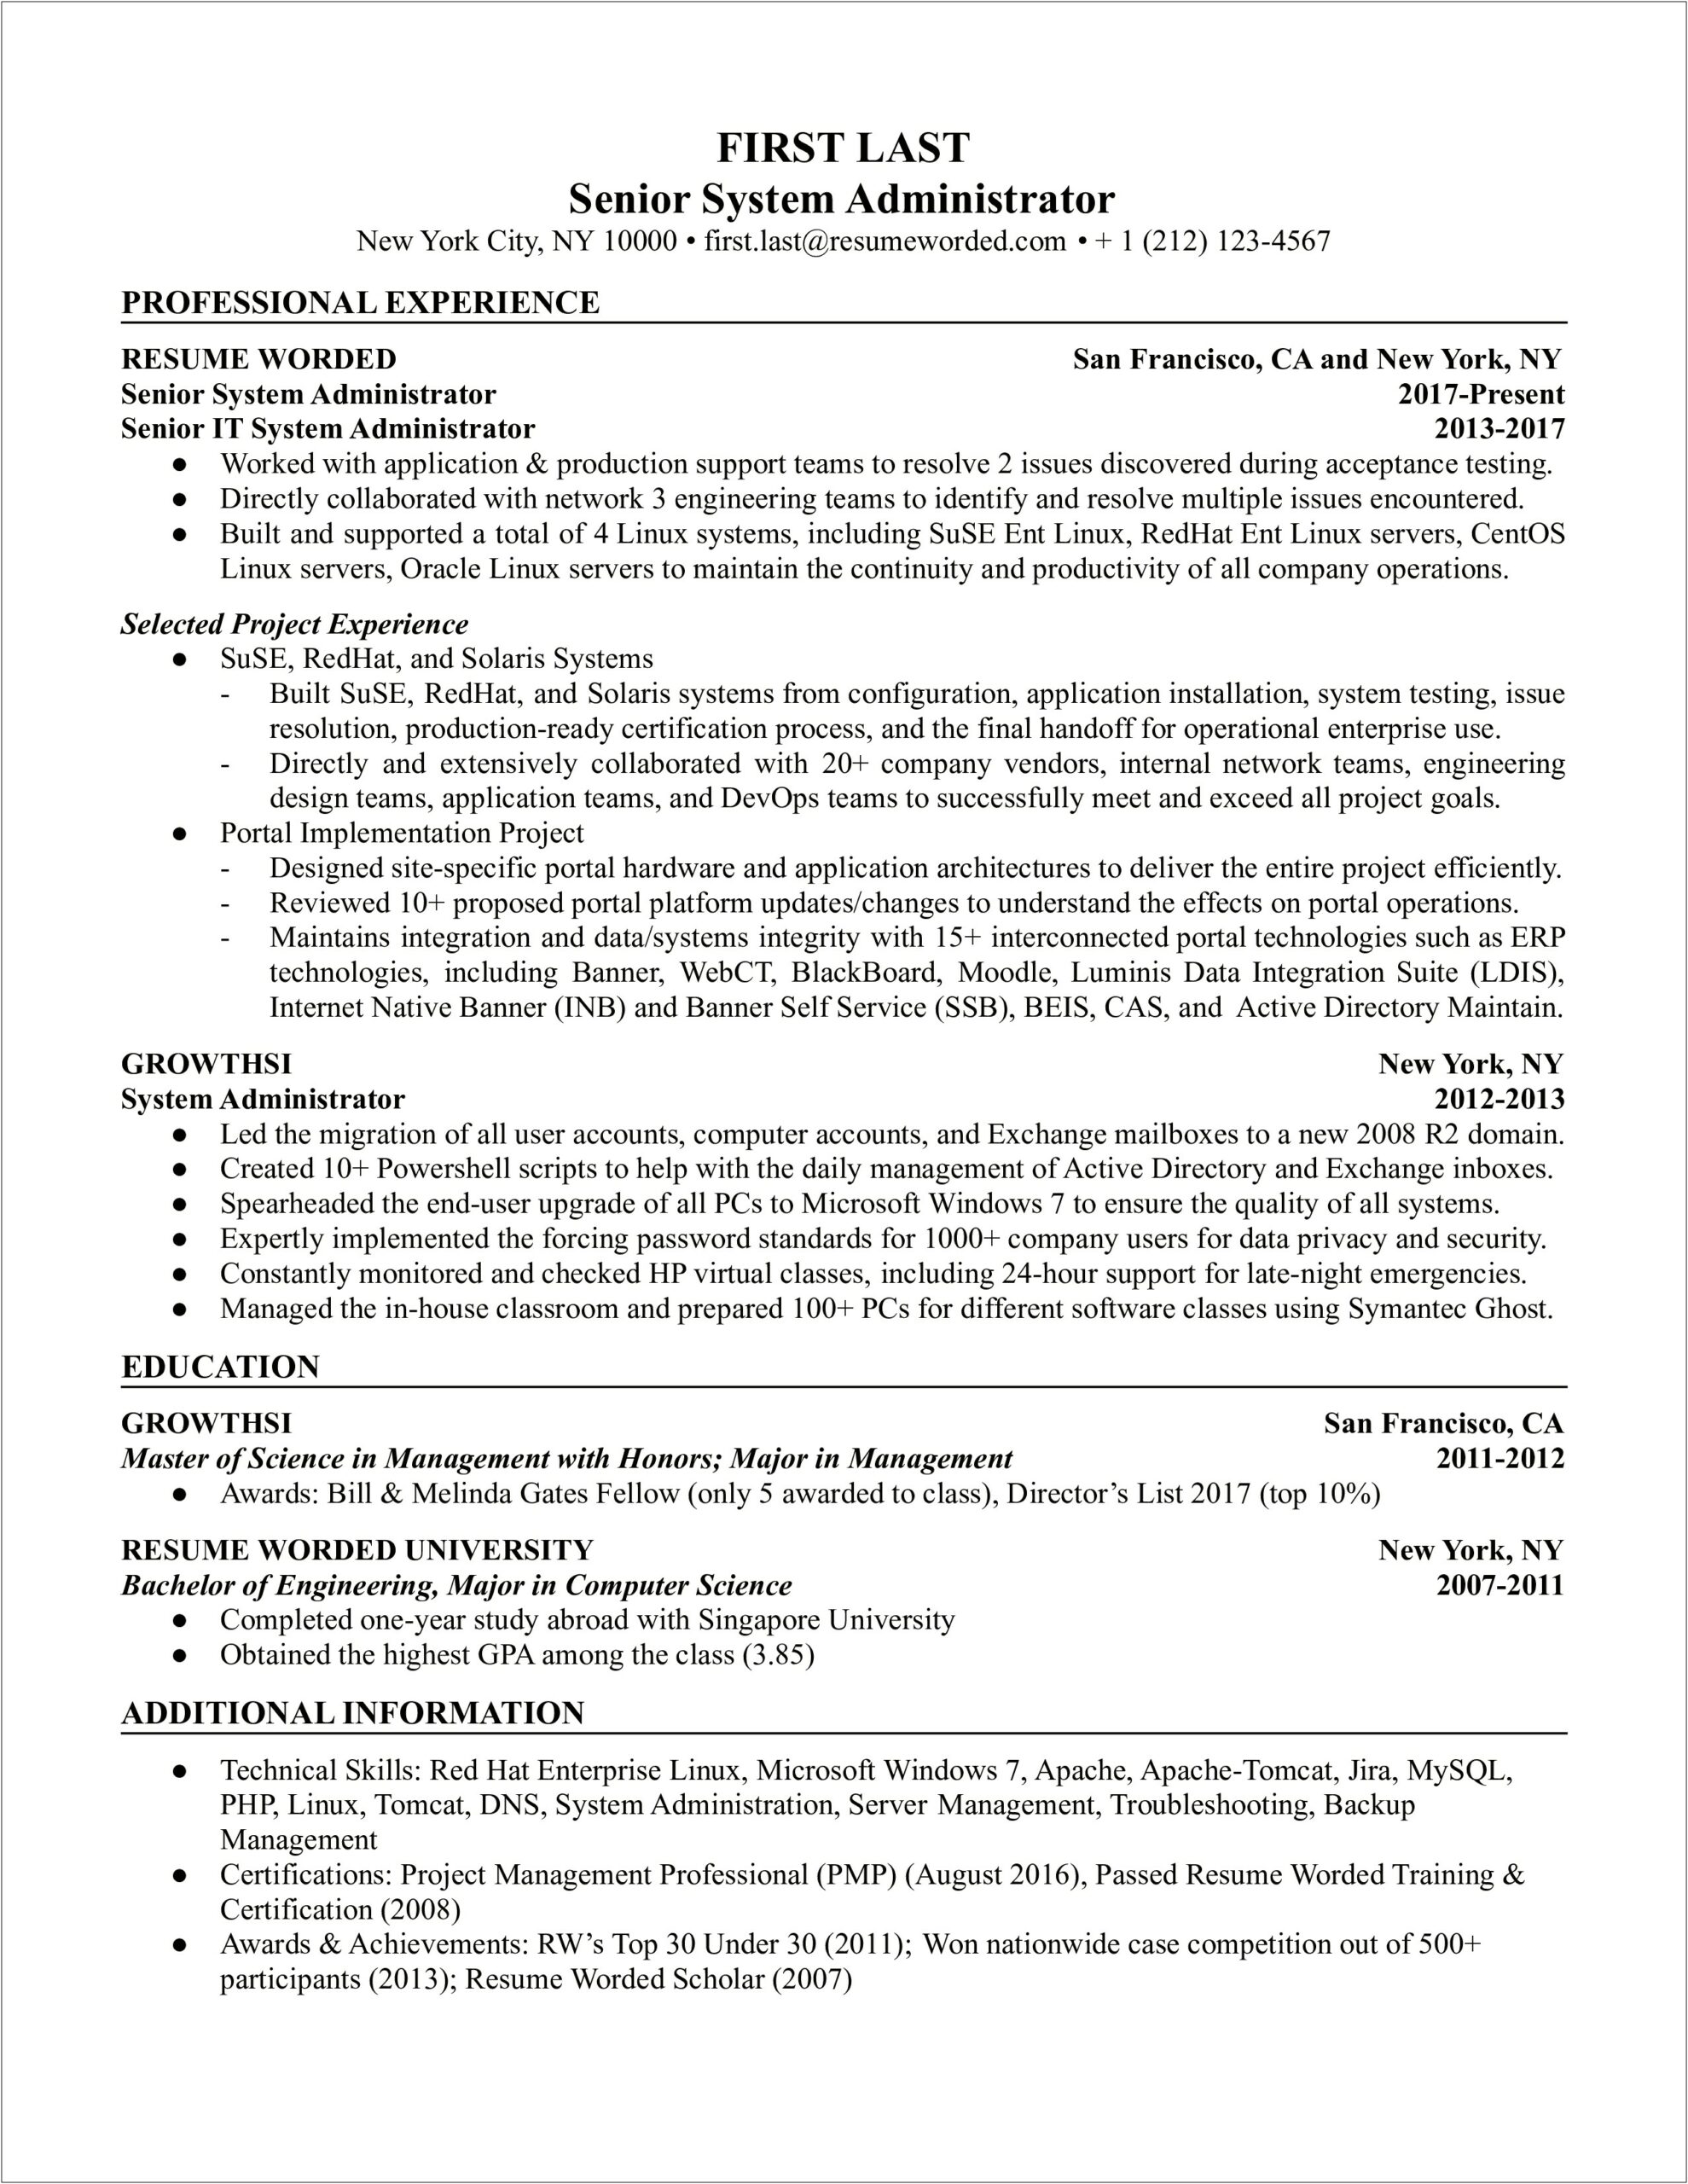 Sample Resume For Experienced Windows System Administrator